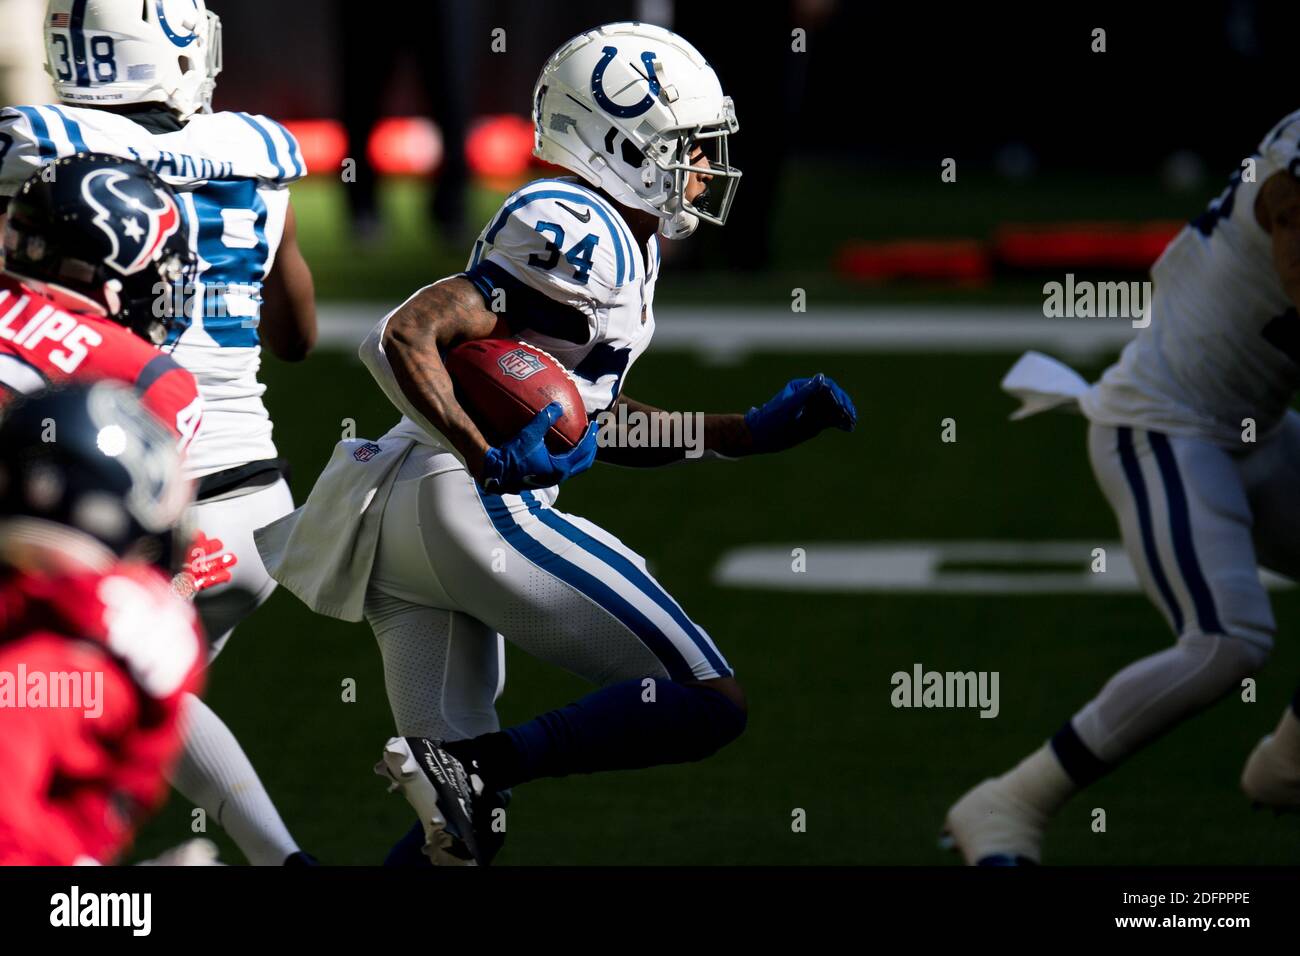 Houston, TX, USA. 6th Dec, 2020. Indianapolis Colts cornerback Isaiah Rodgers (34) carries the ball during the 1st quarter of an NFL football game between the Indianapolis Colts and the Houston Texans at NRG Stadium in Houston, TX. Trask Smith/CSM/Alamy Live News Stock Photo